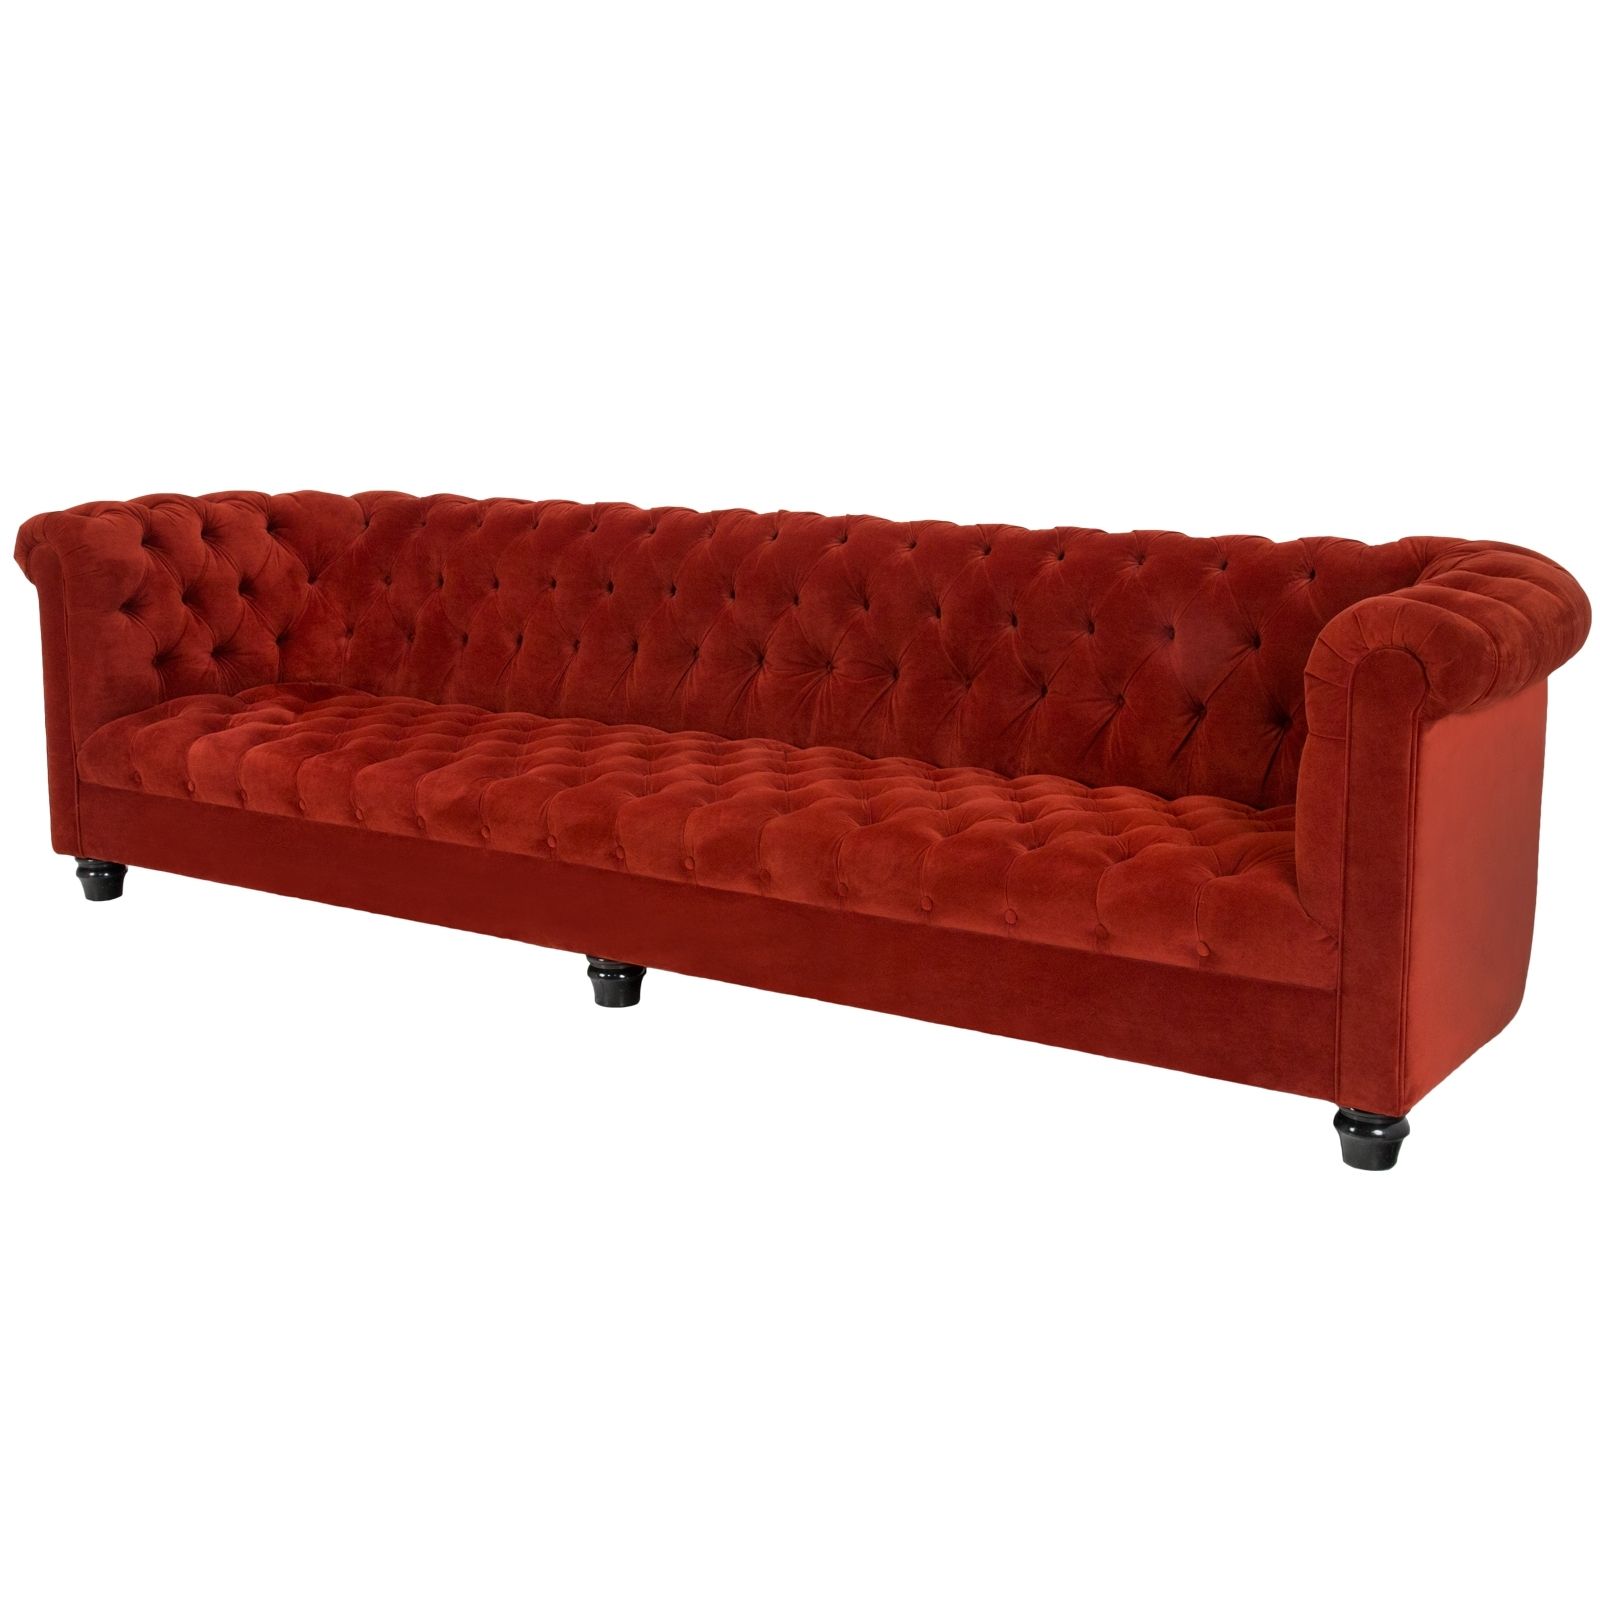 Newest Manchester Sofas In Tufted Sofa Rentals (View 3 of 15)